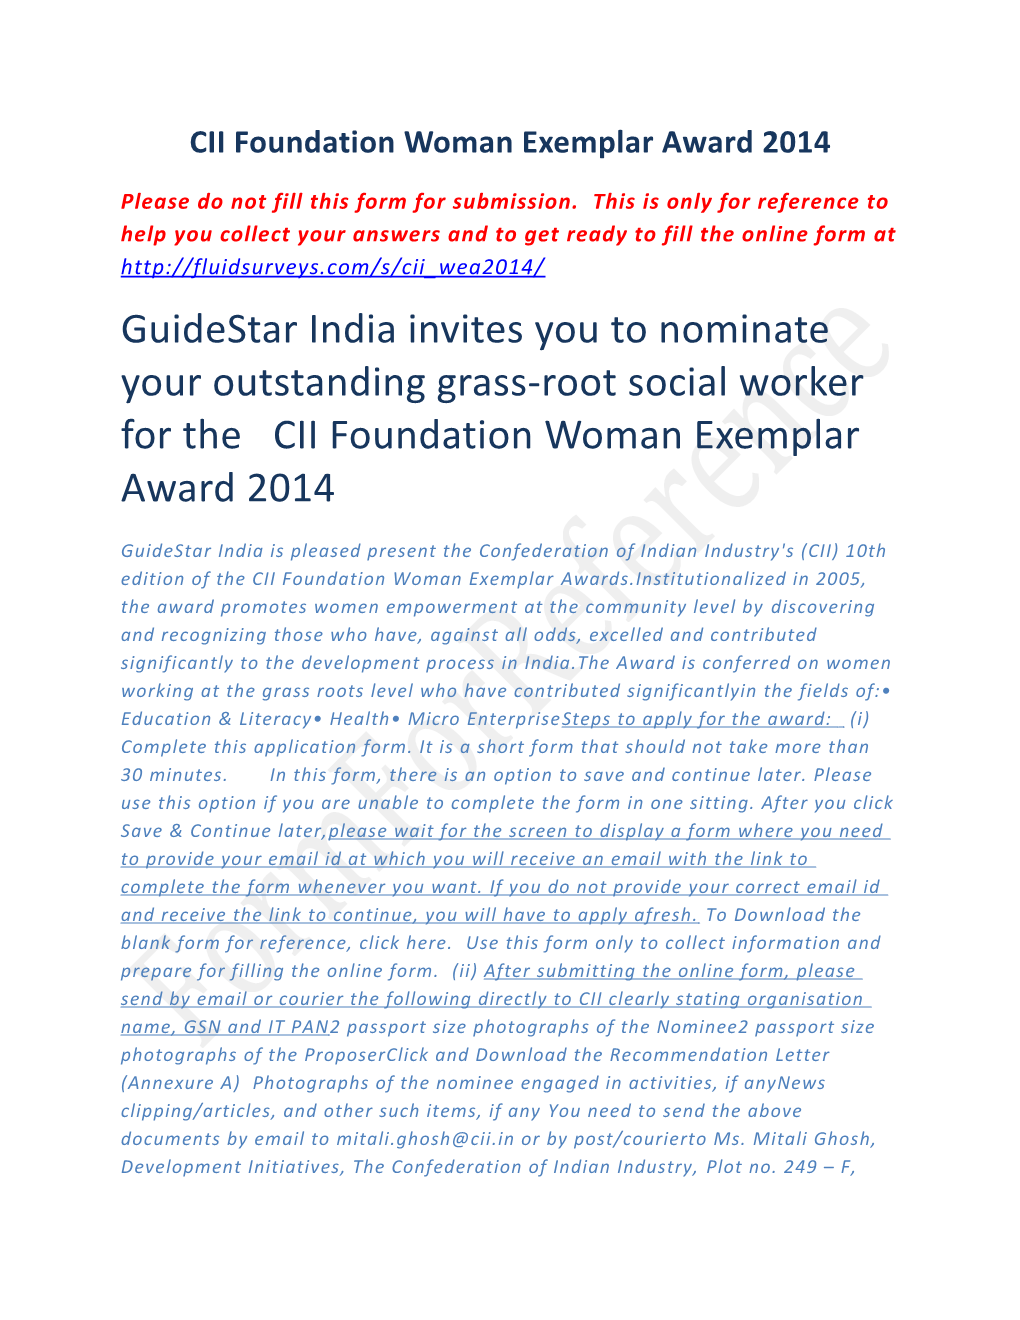 Invites You to Nominate Your Outstanding Grass-Root Social Worker for the CII Foundation